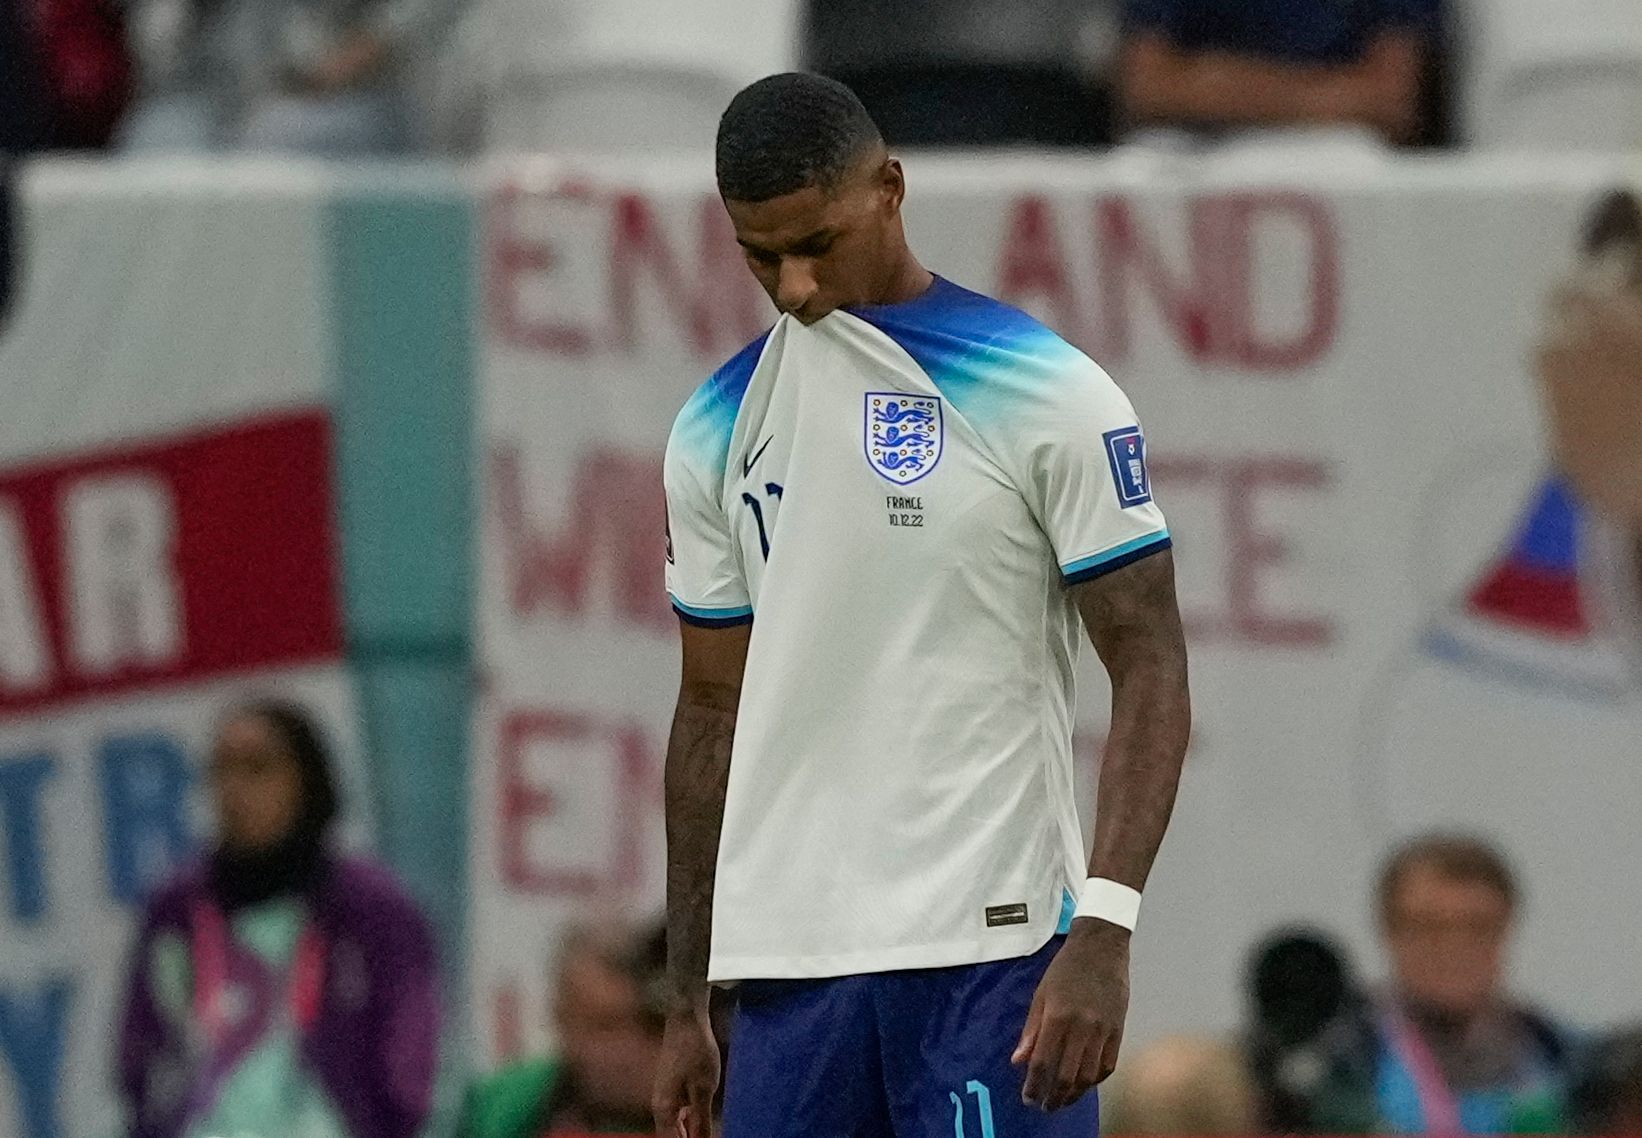 Marcus Rashford biting on his England shirt with a sad look on his face after he missed the free kick